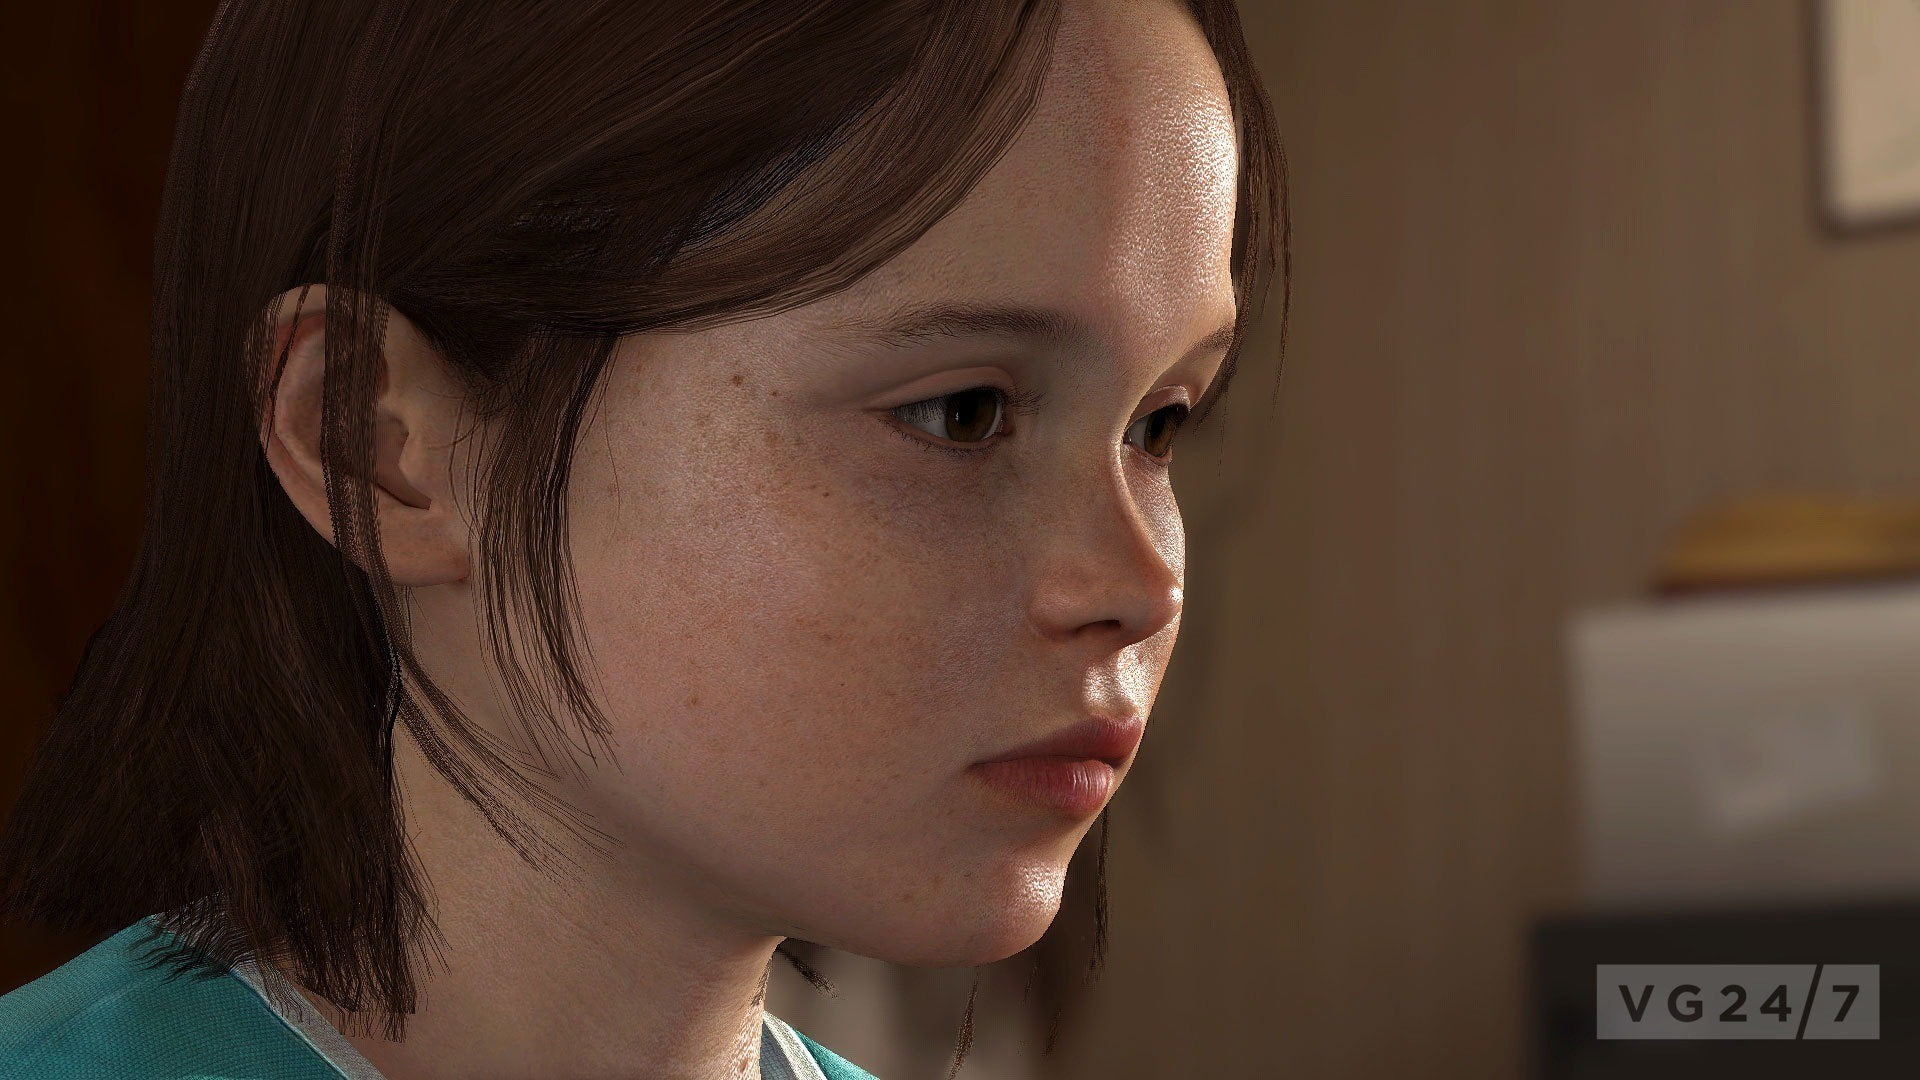 beyond two souls, headshot, one person, portrait, indoors, sadness